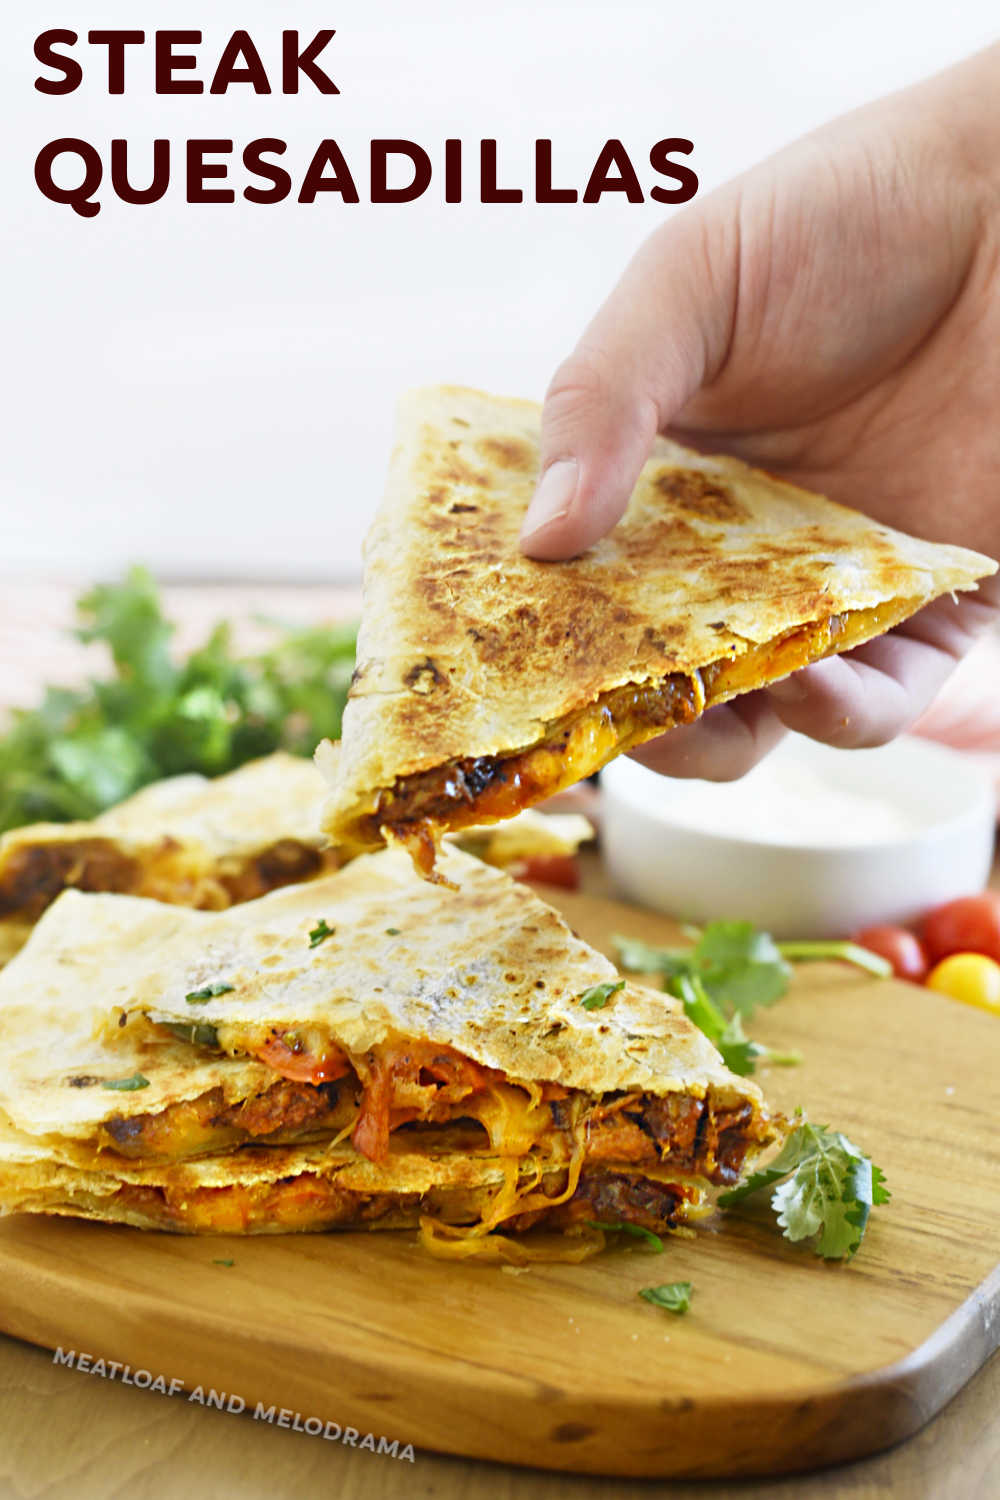 This Steak Quesadilla Recipe made with leftover steak, melted cheese, onions and peppers on a crispy tortilla is quick, easy and delicious! Skip takeout and save money when you make quesadillas at home for a simple lunch or dinner! via @meamel